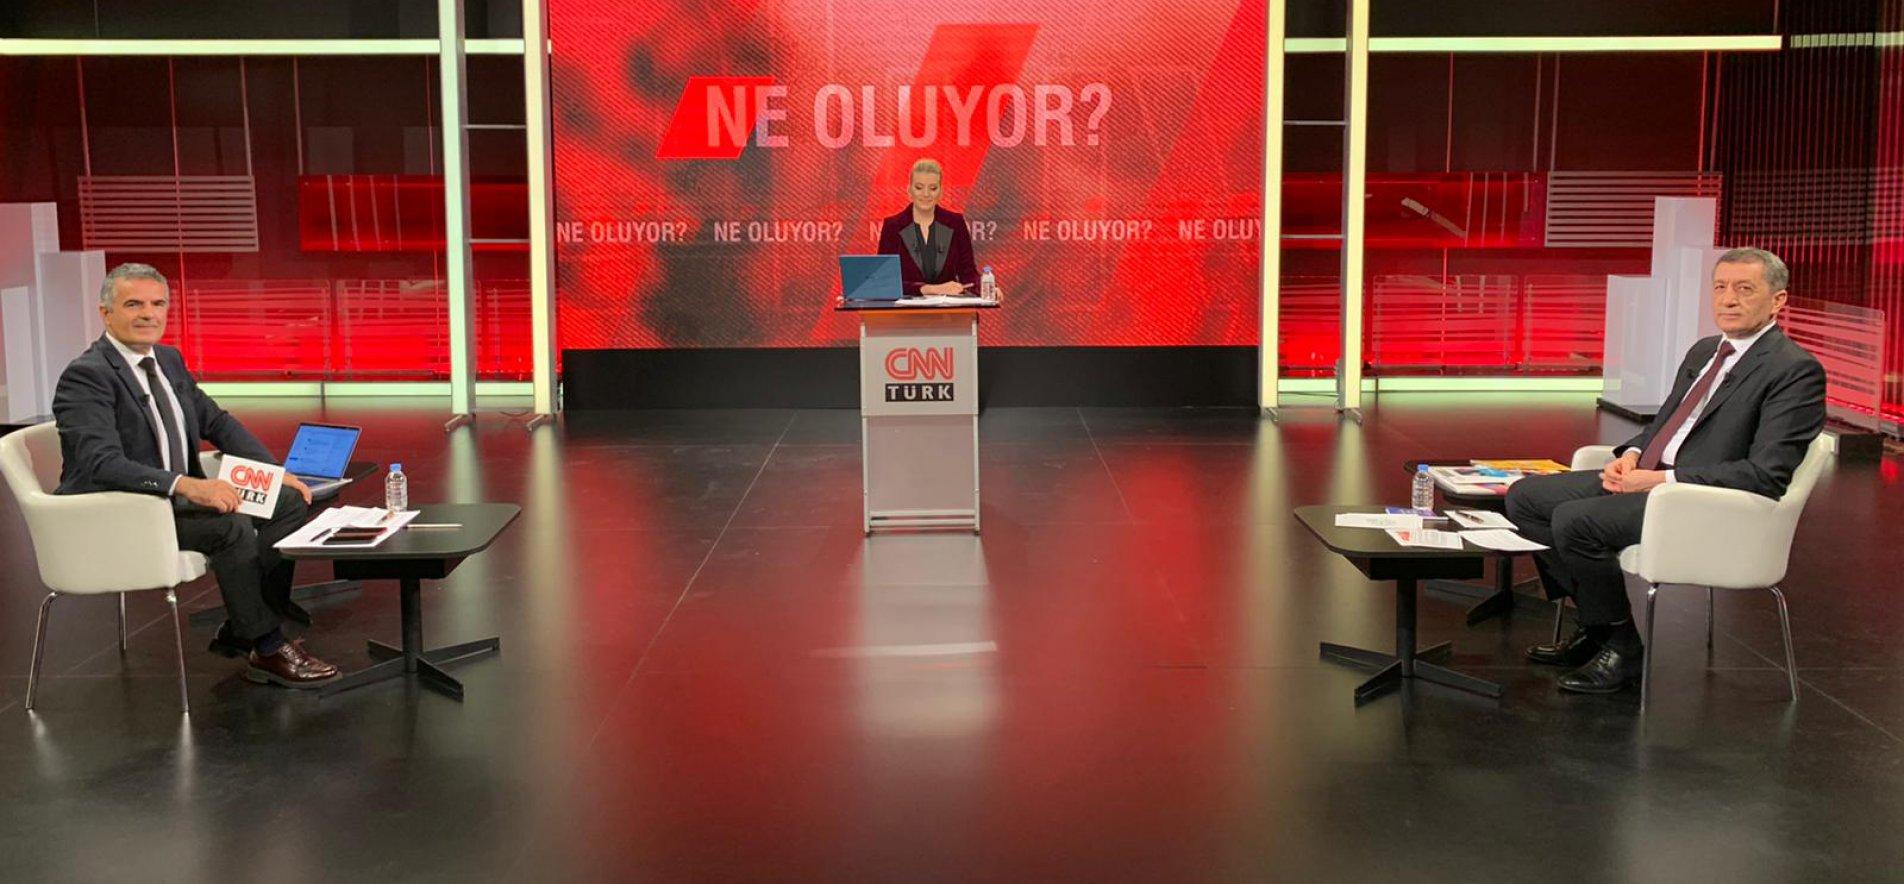 MINISTER SELÇUK ANSWERED QUESTIONS DURING LIVE TV PROGRAM